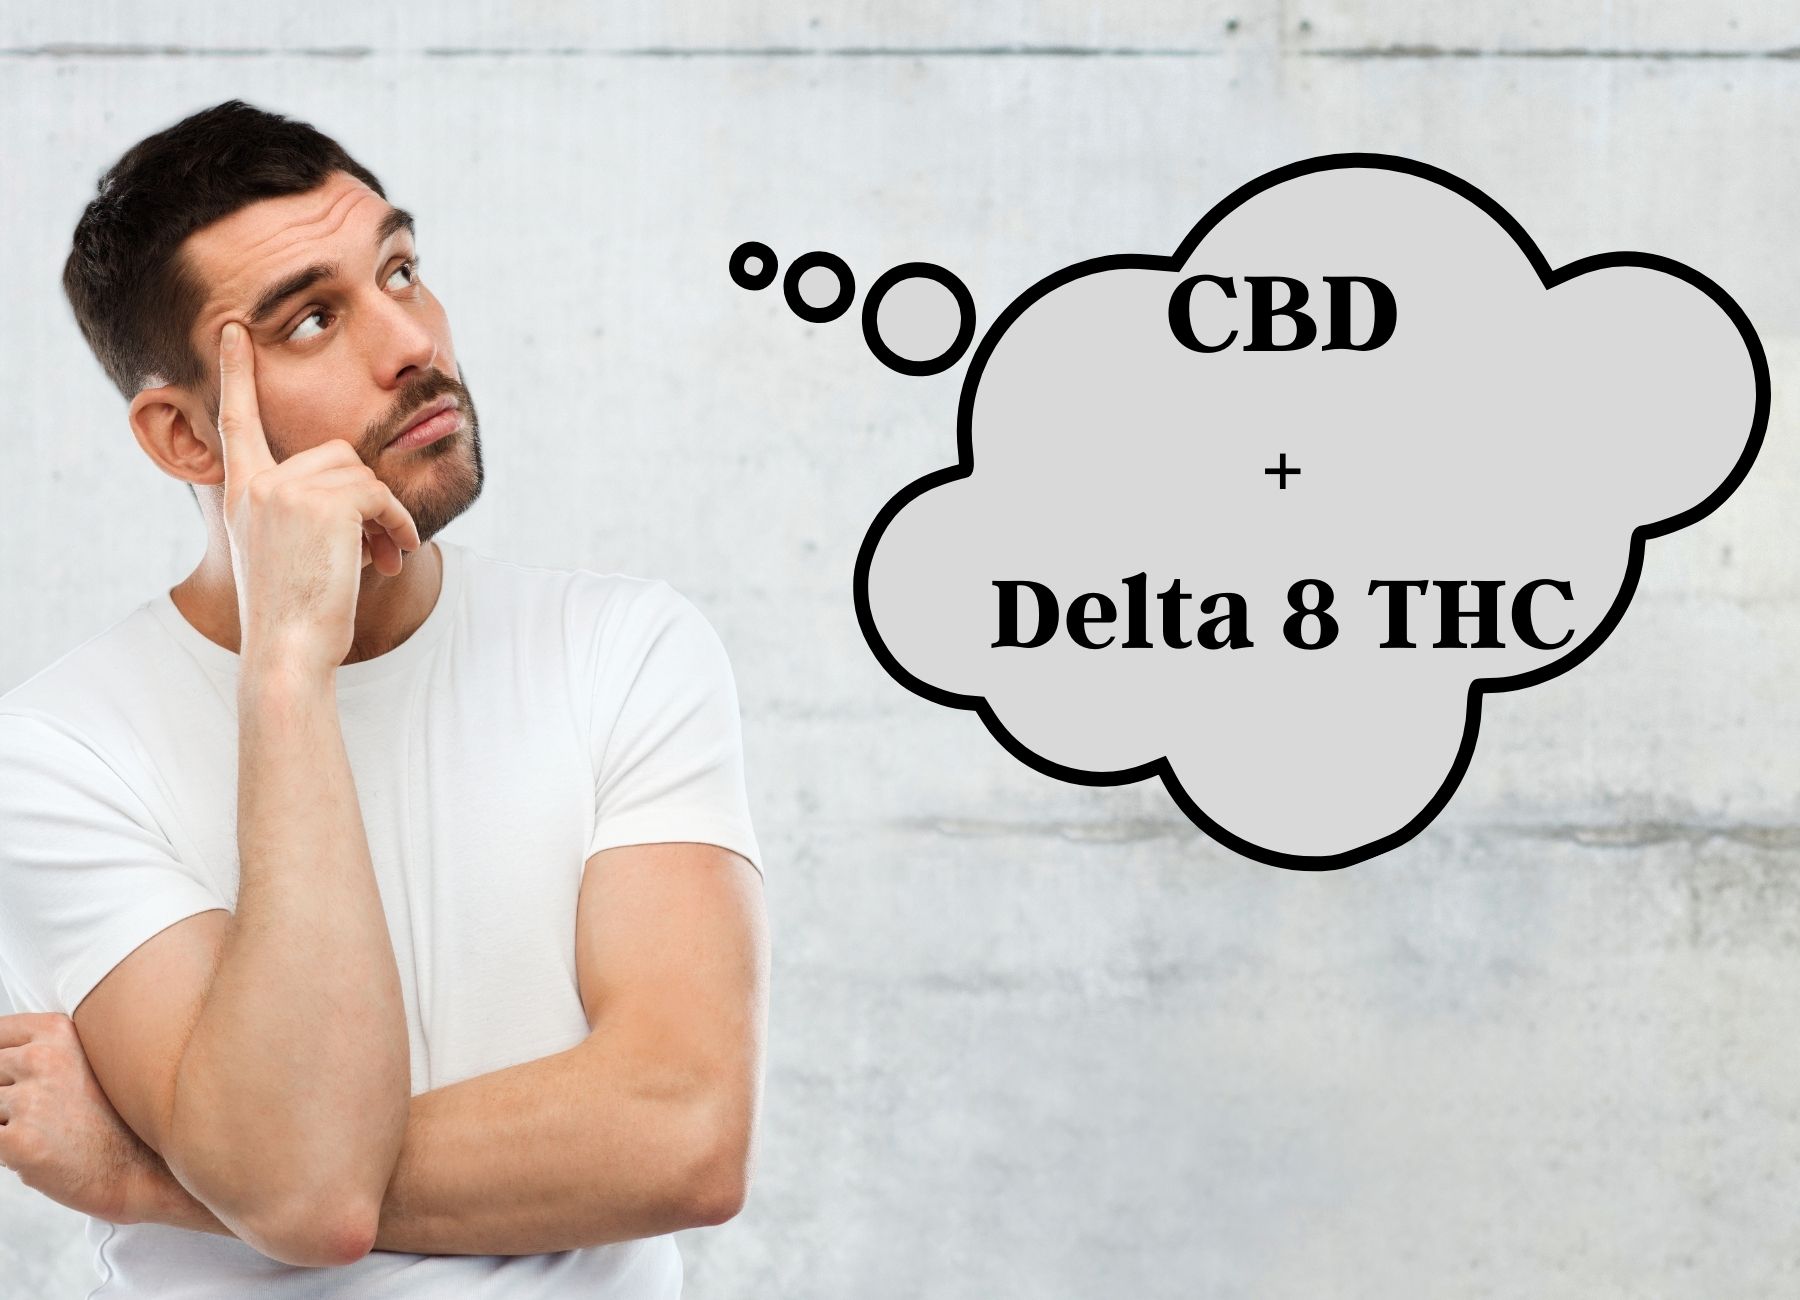 Can We Use Delta 8 and CBD Together